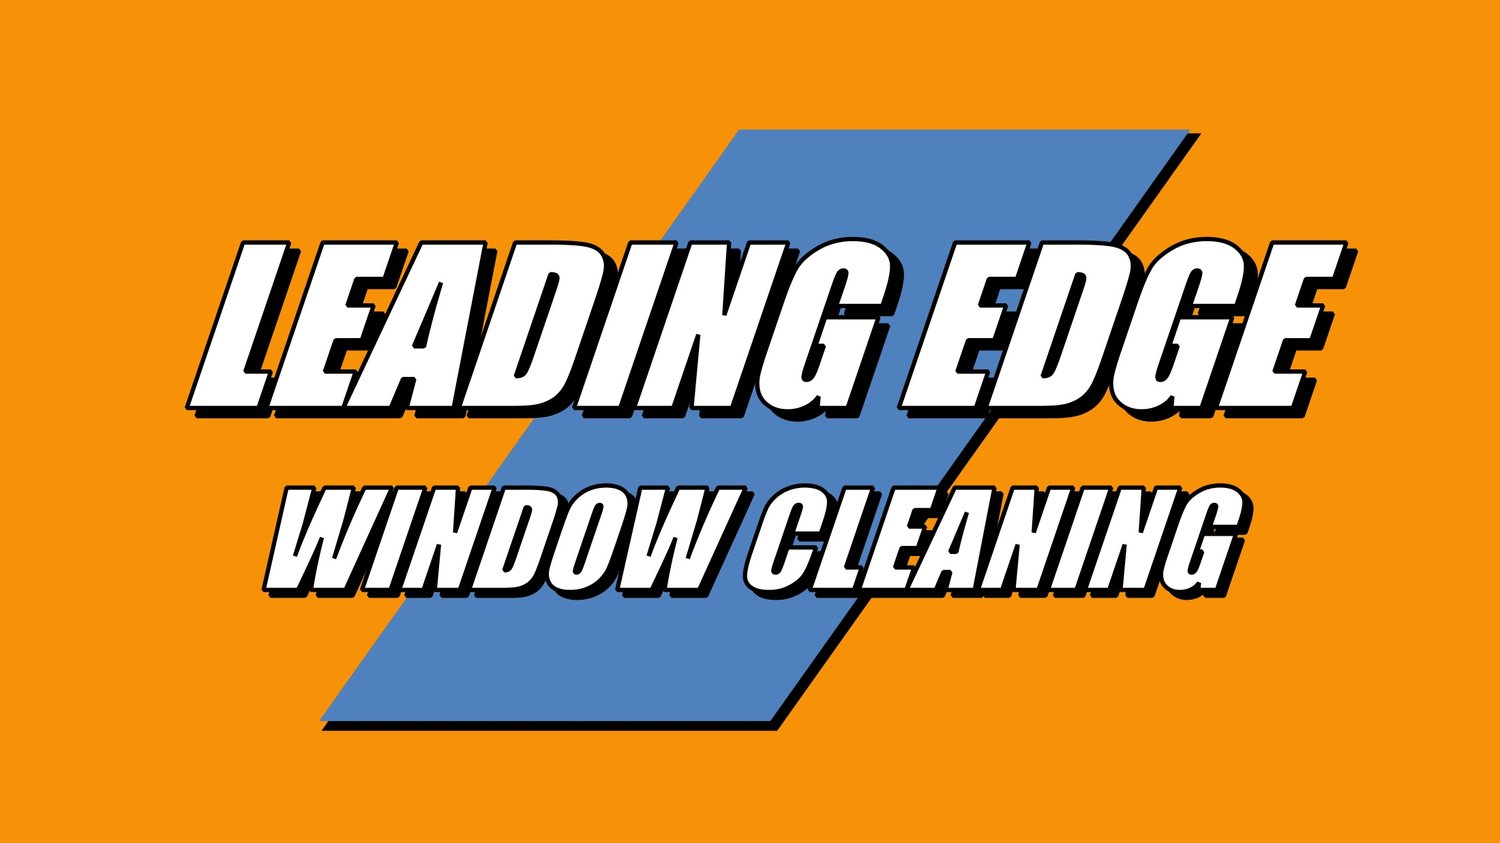 Professional Window Cleaning Parker CO